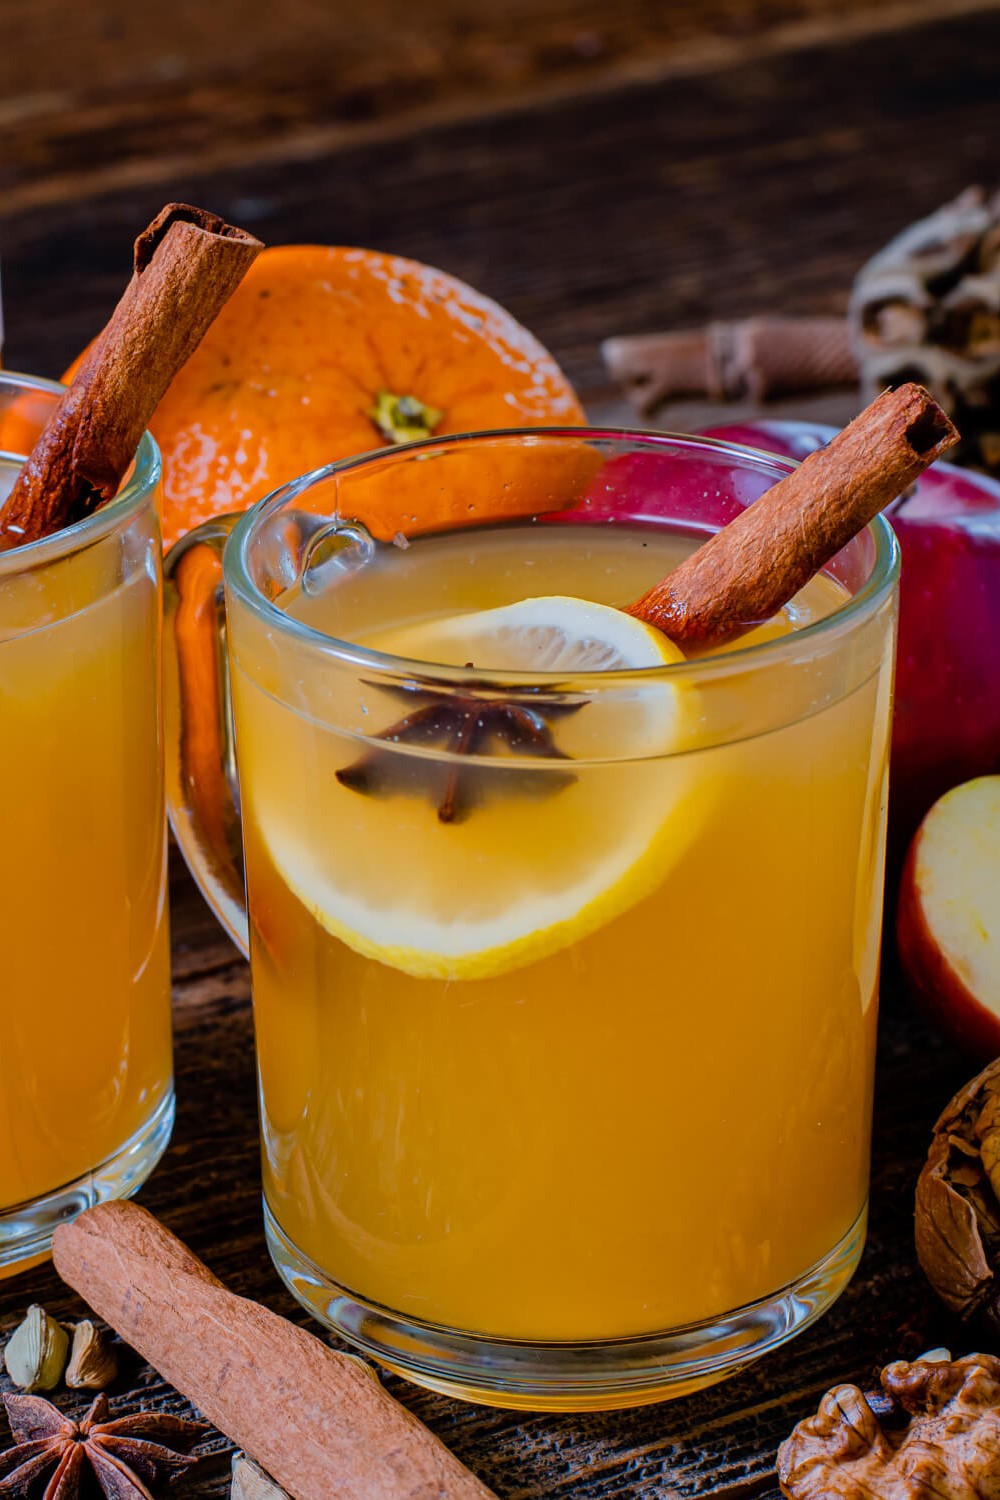 This is a simple, quick and delicious mulled white wine recipe. It's spiced warmth is perfect for cold winter nights and holiday parties!